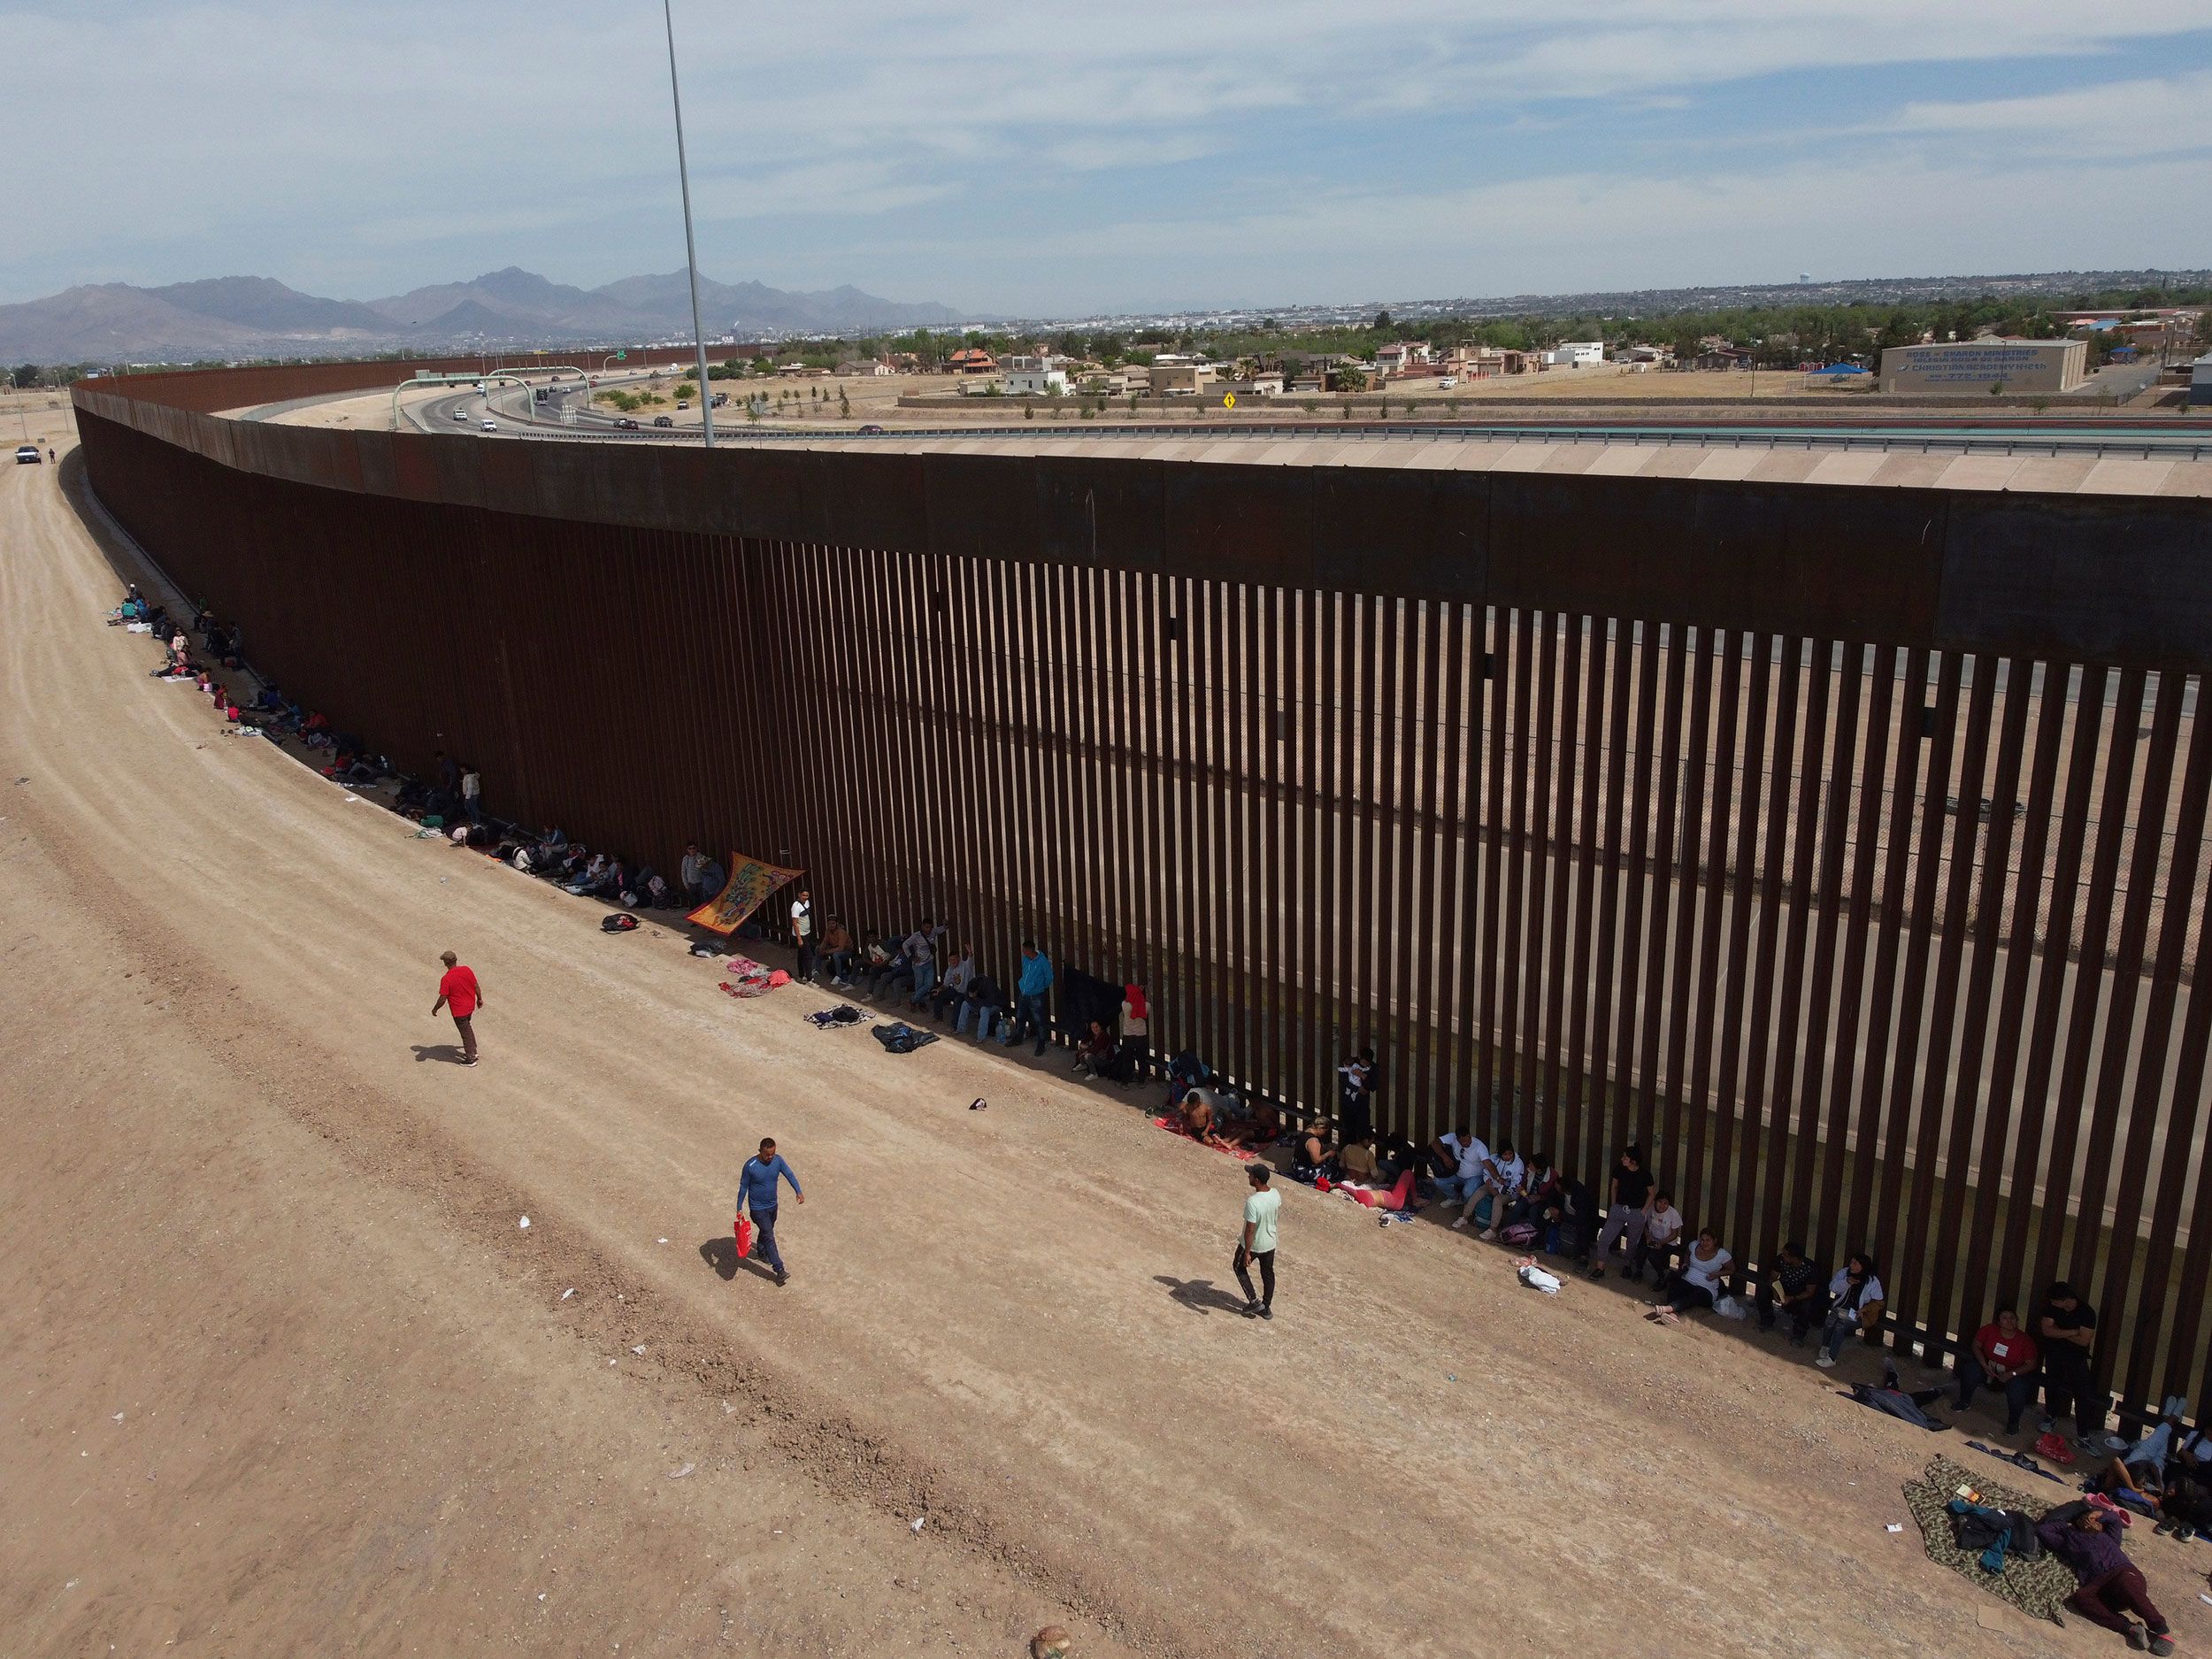 What is Title 42 and what happens next at the border?